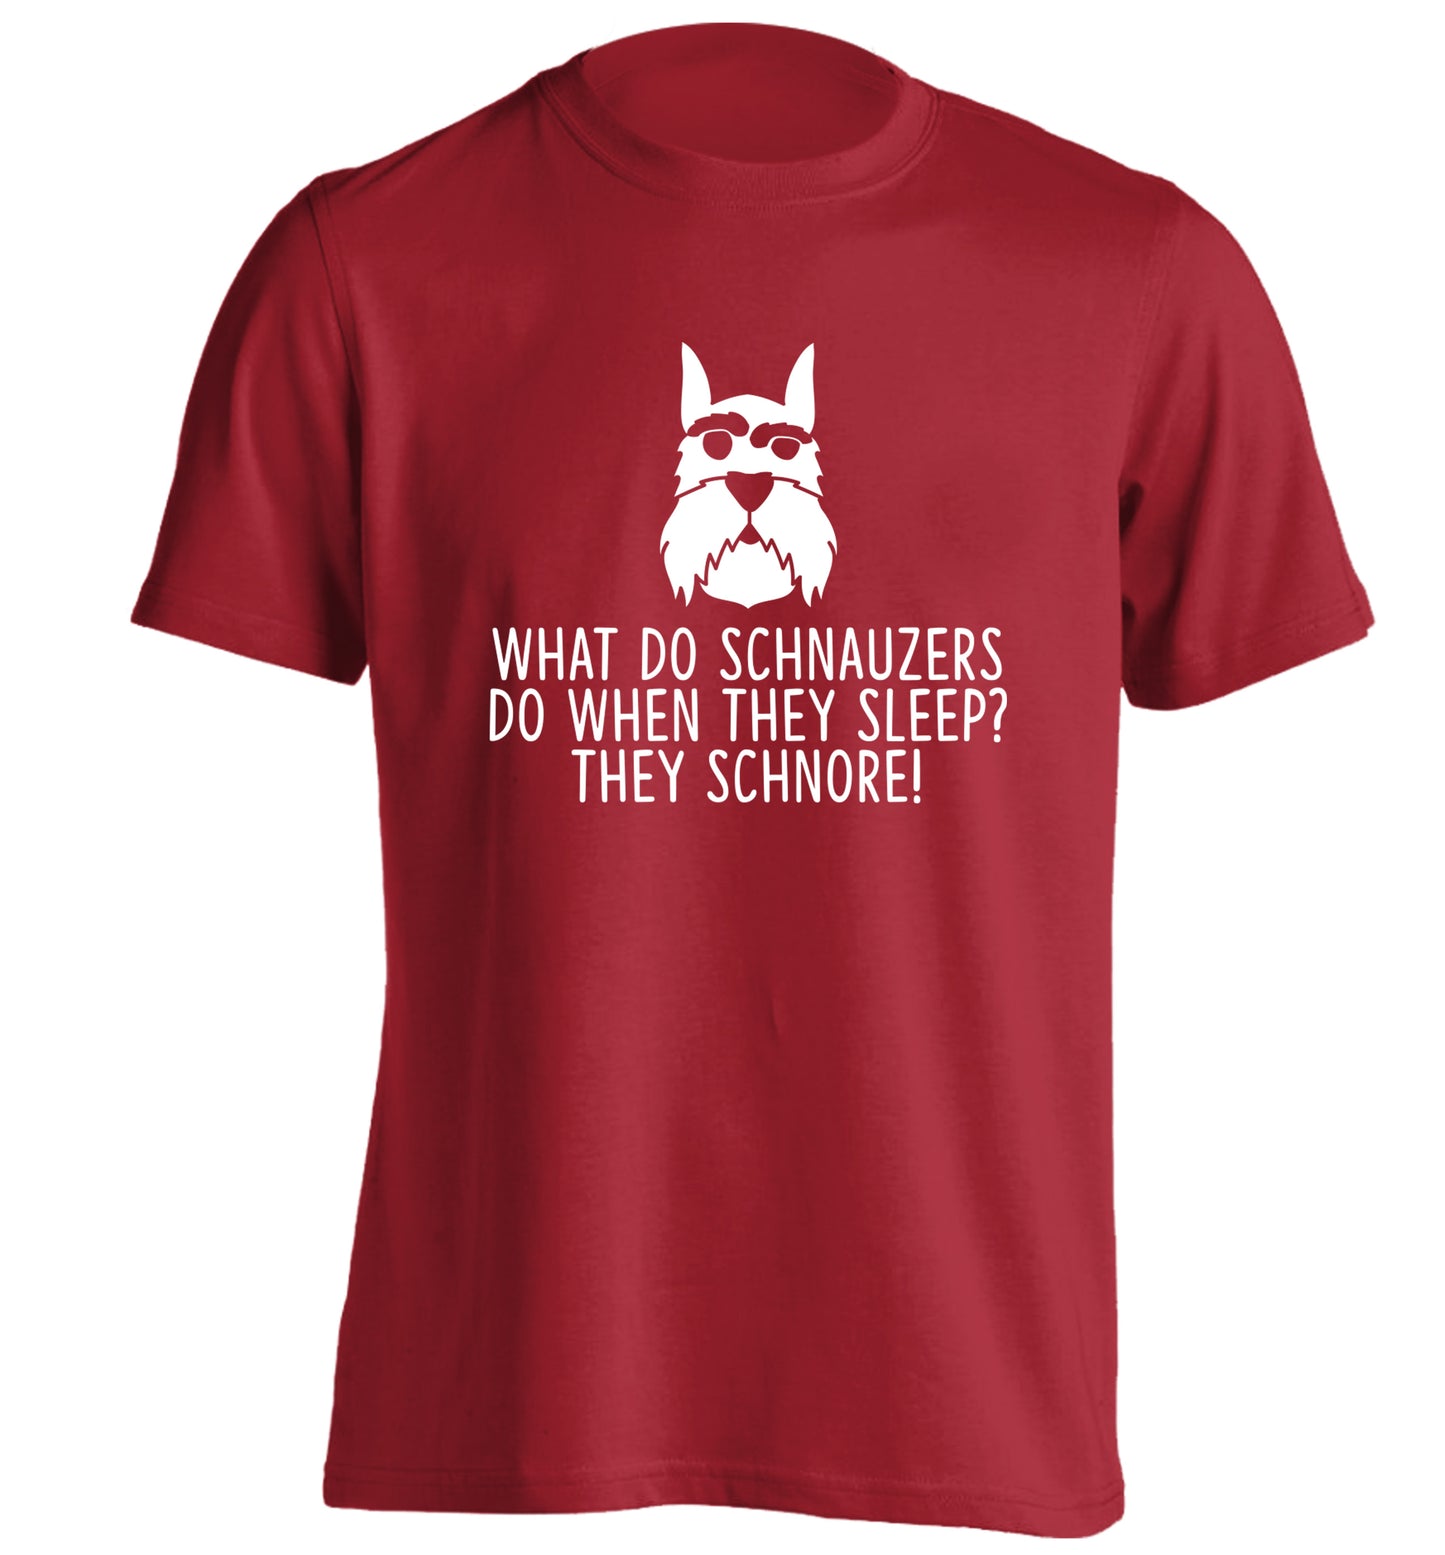 What do schnauzers do when they sleep? Schnore! adults unisex red Tshirt 2XL